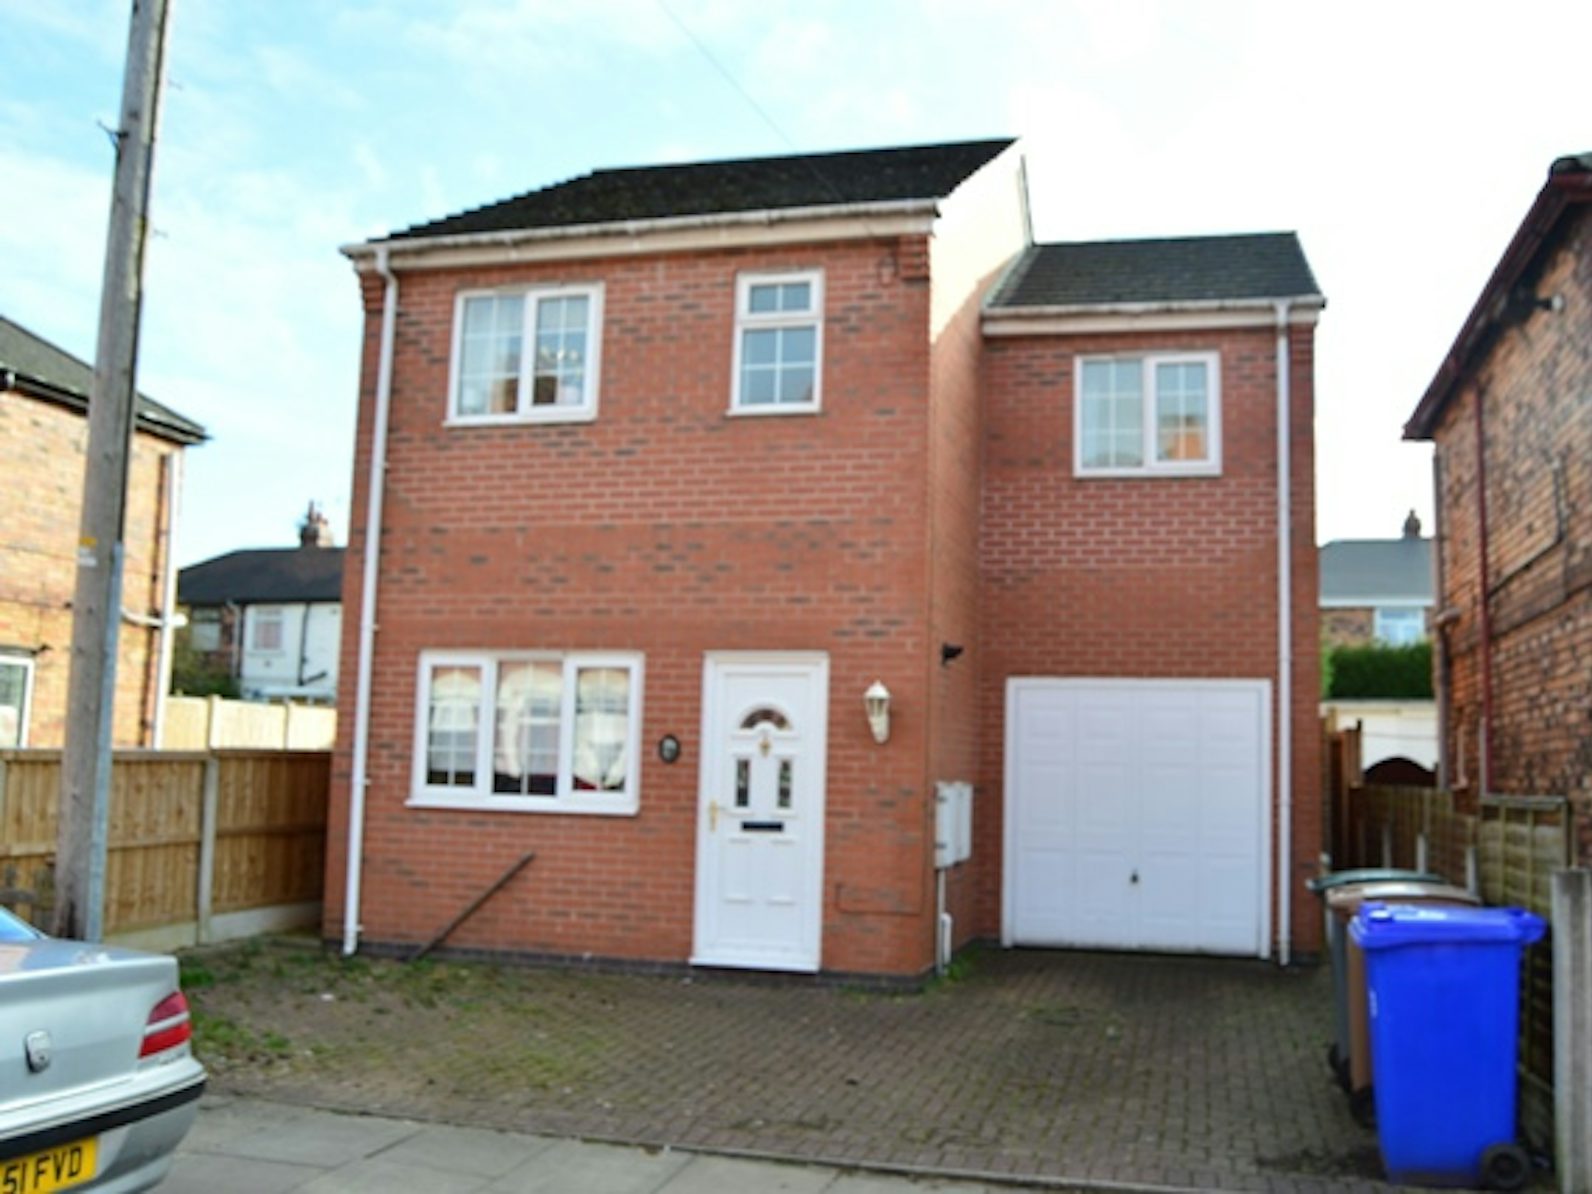 Detached House to rent on Stanley Road Hartshill, Stoke-on-Trent, ST4